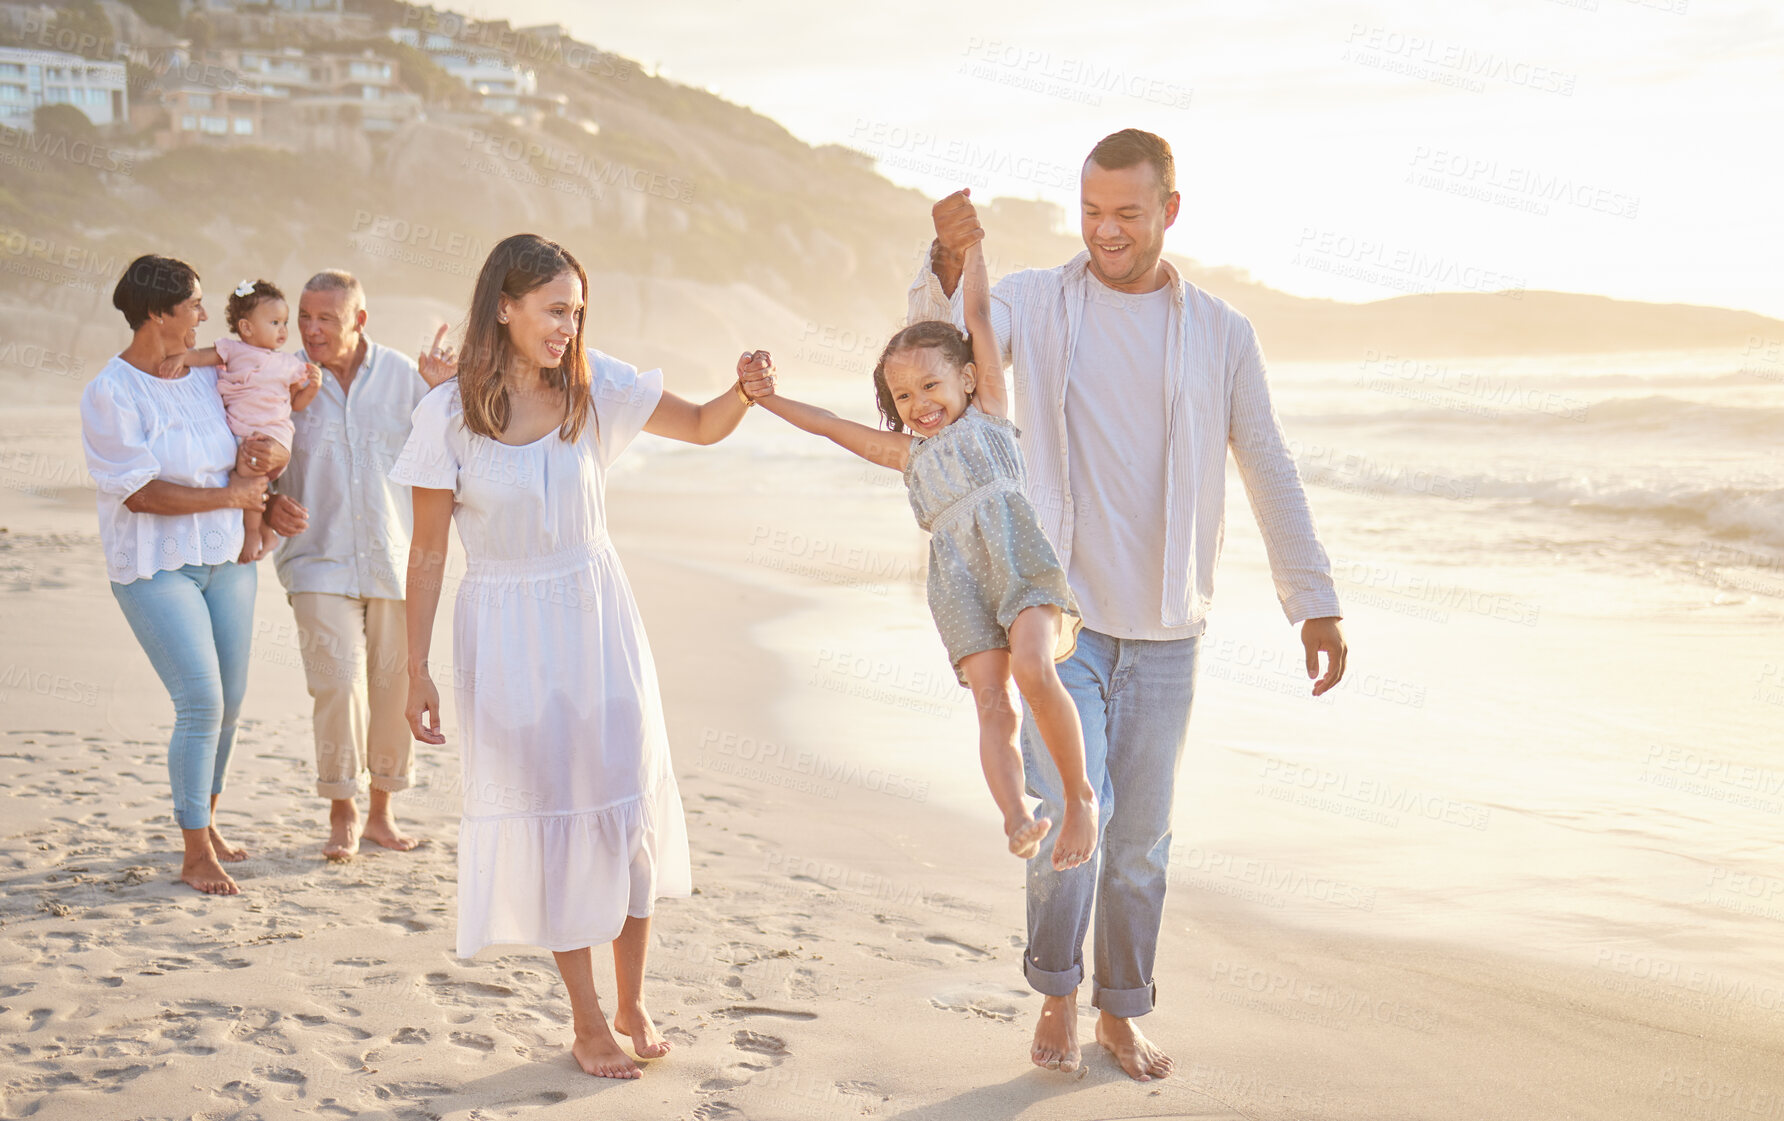 Buy stock photo Cute little girl swinging while holding hands with her parents. Young mom and day walking hand in hand with their daughter and lifting her while walking on the beach. Family fun in the summer sun